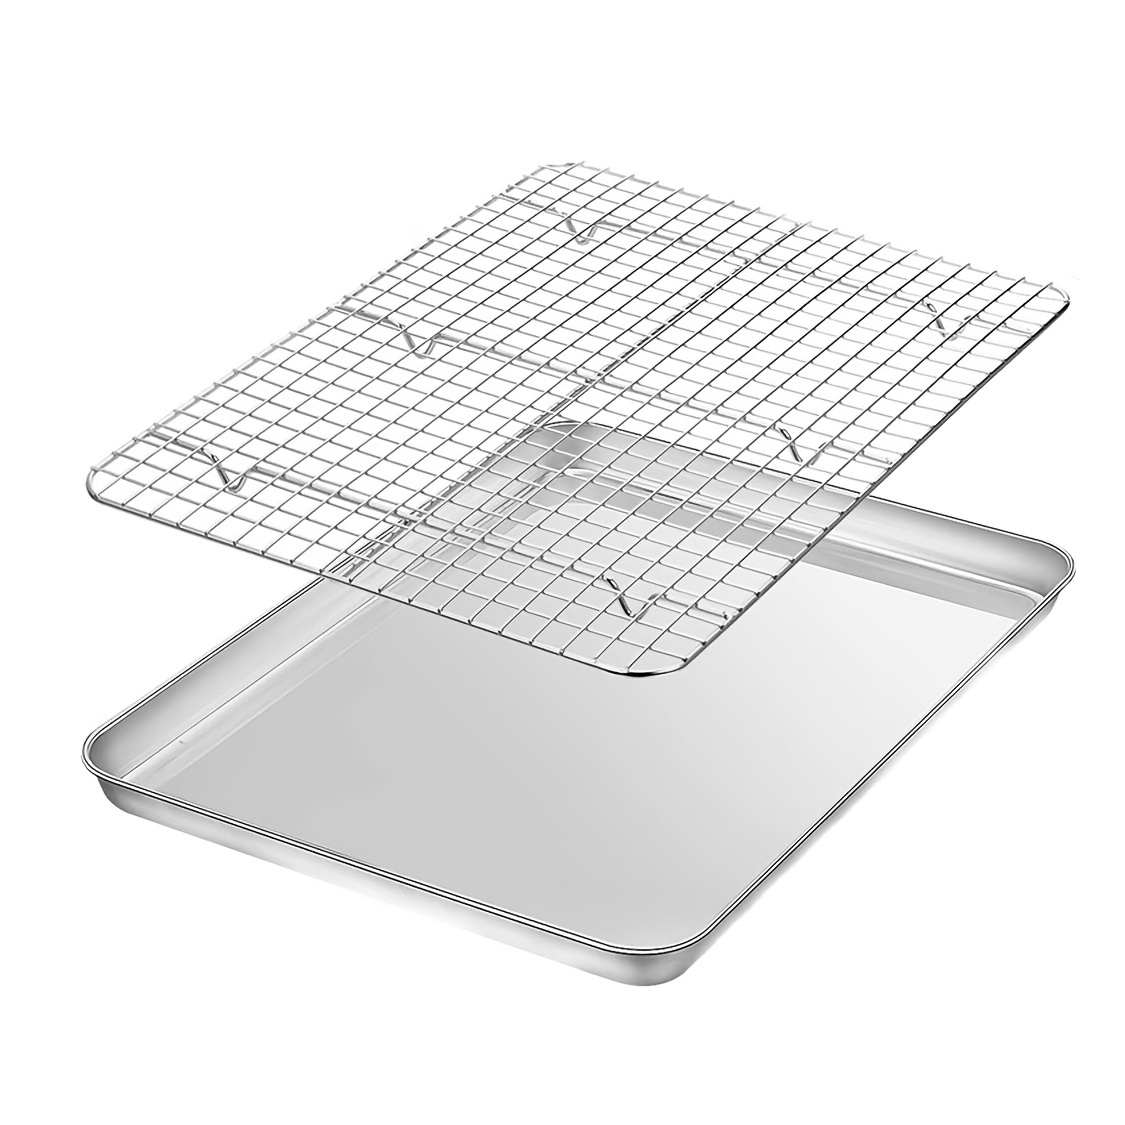 CHEFMADE Roasting Pan with Rack, 13-inch Non-Stick Rectangular Shallow Dish Sheet Pan with Wire Rack for Oven Baking, BBQ, Jelly Roll and Roasting 9